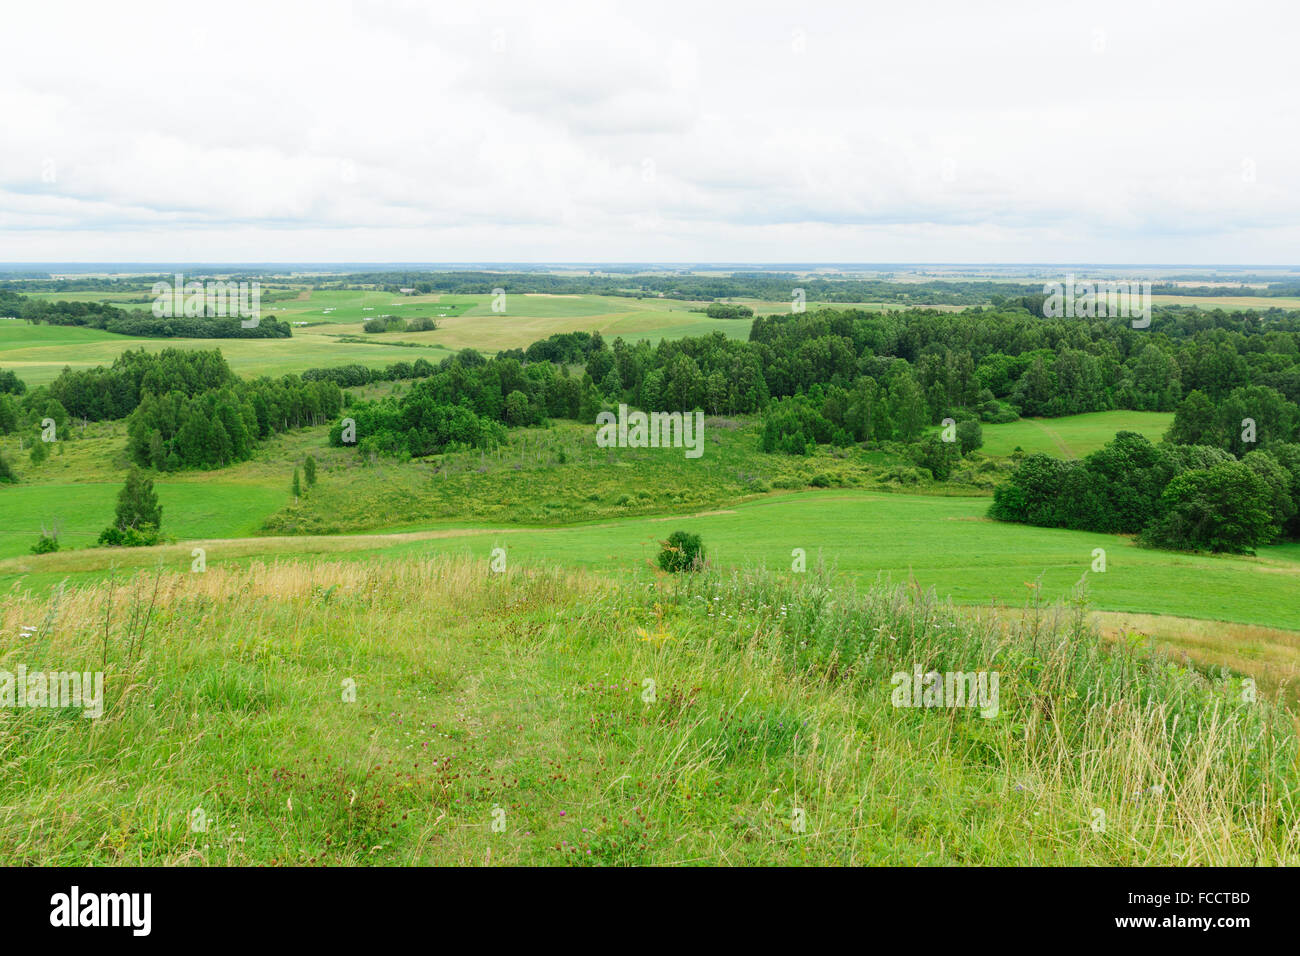 view from the hill overgrown with a grass on open spaces Stock Photo